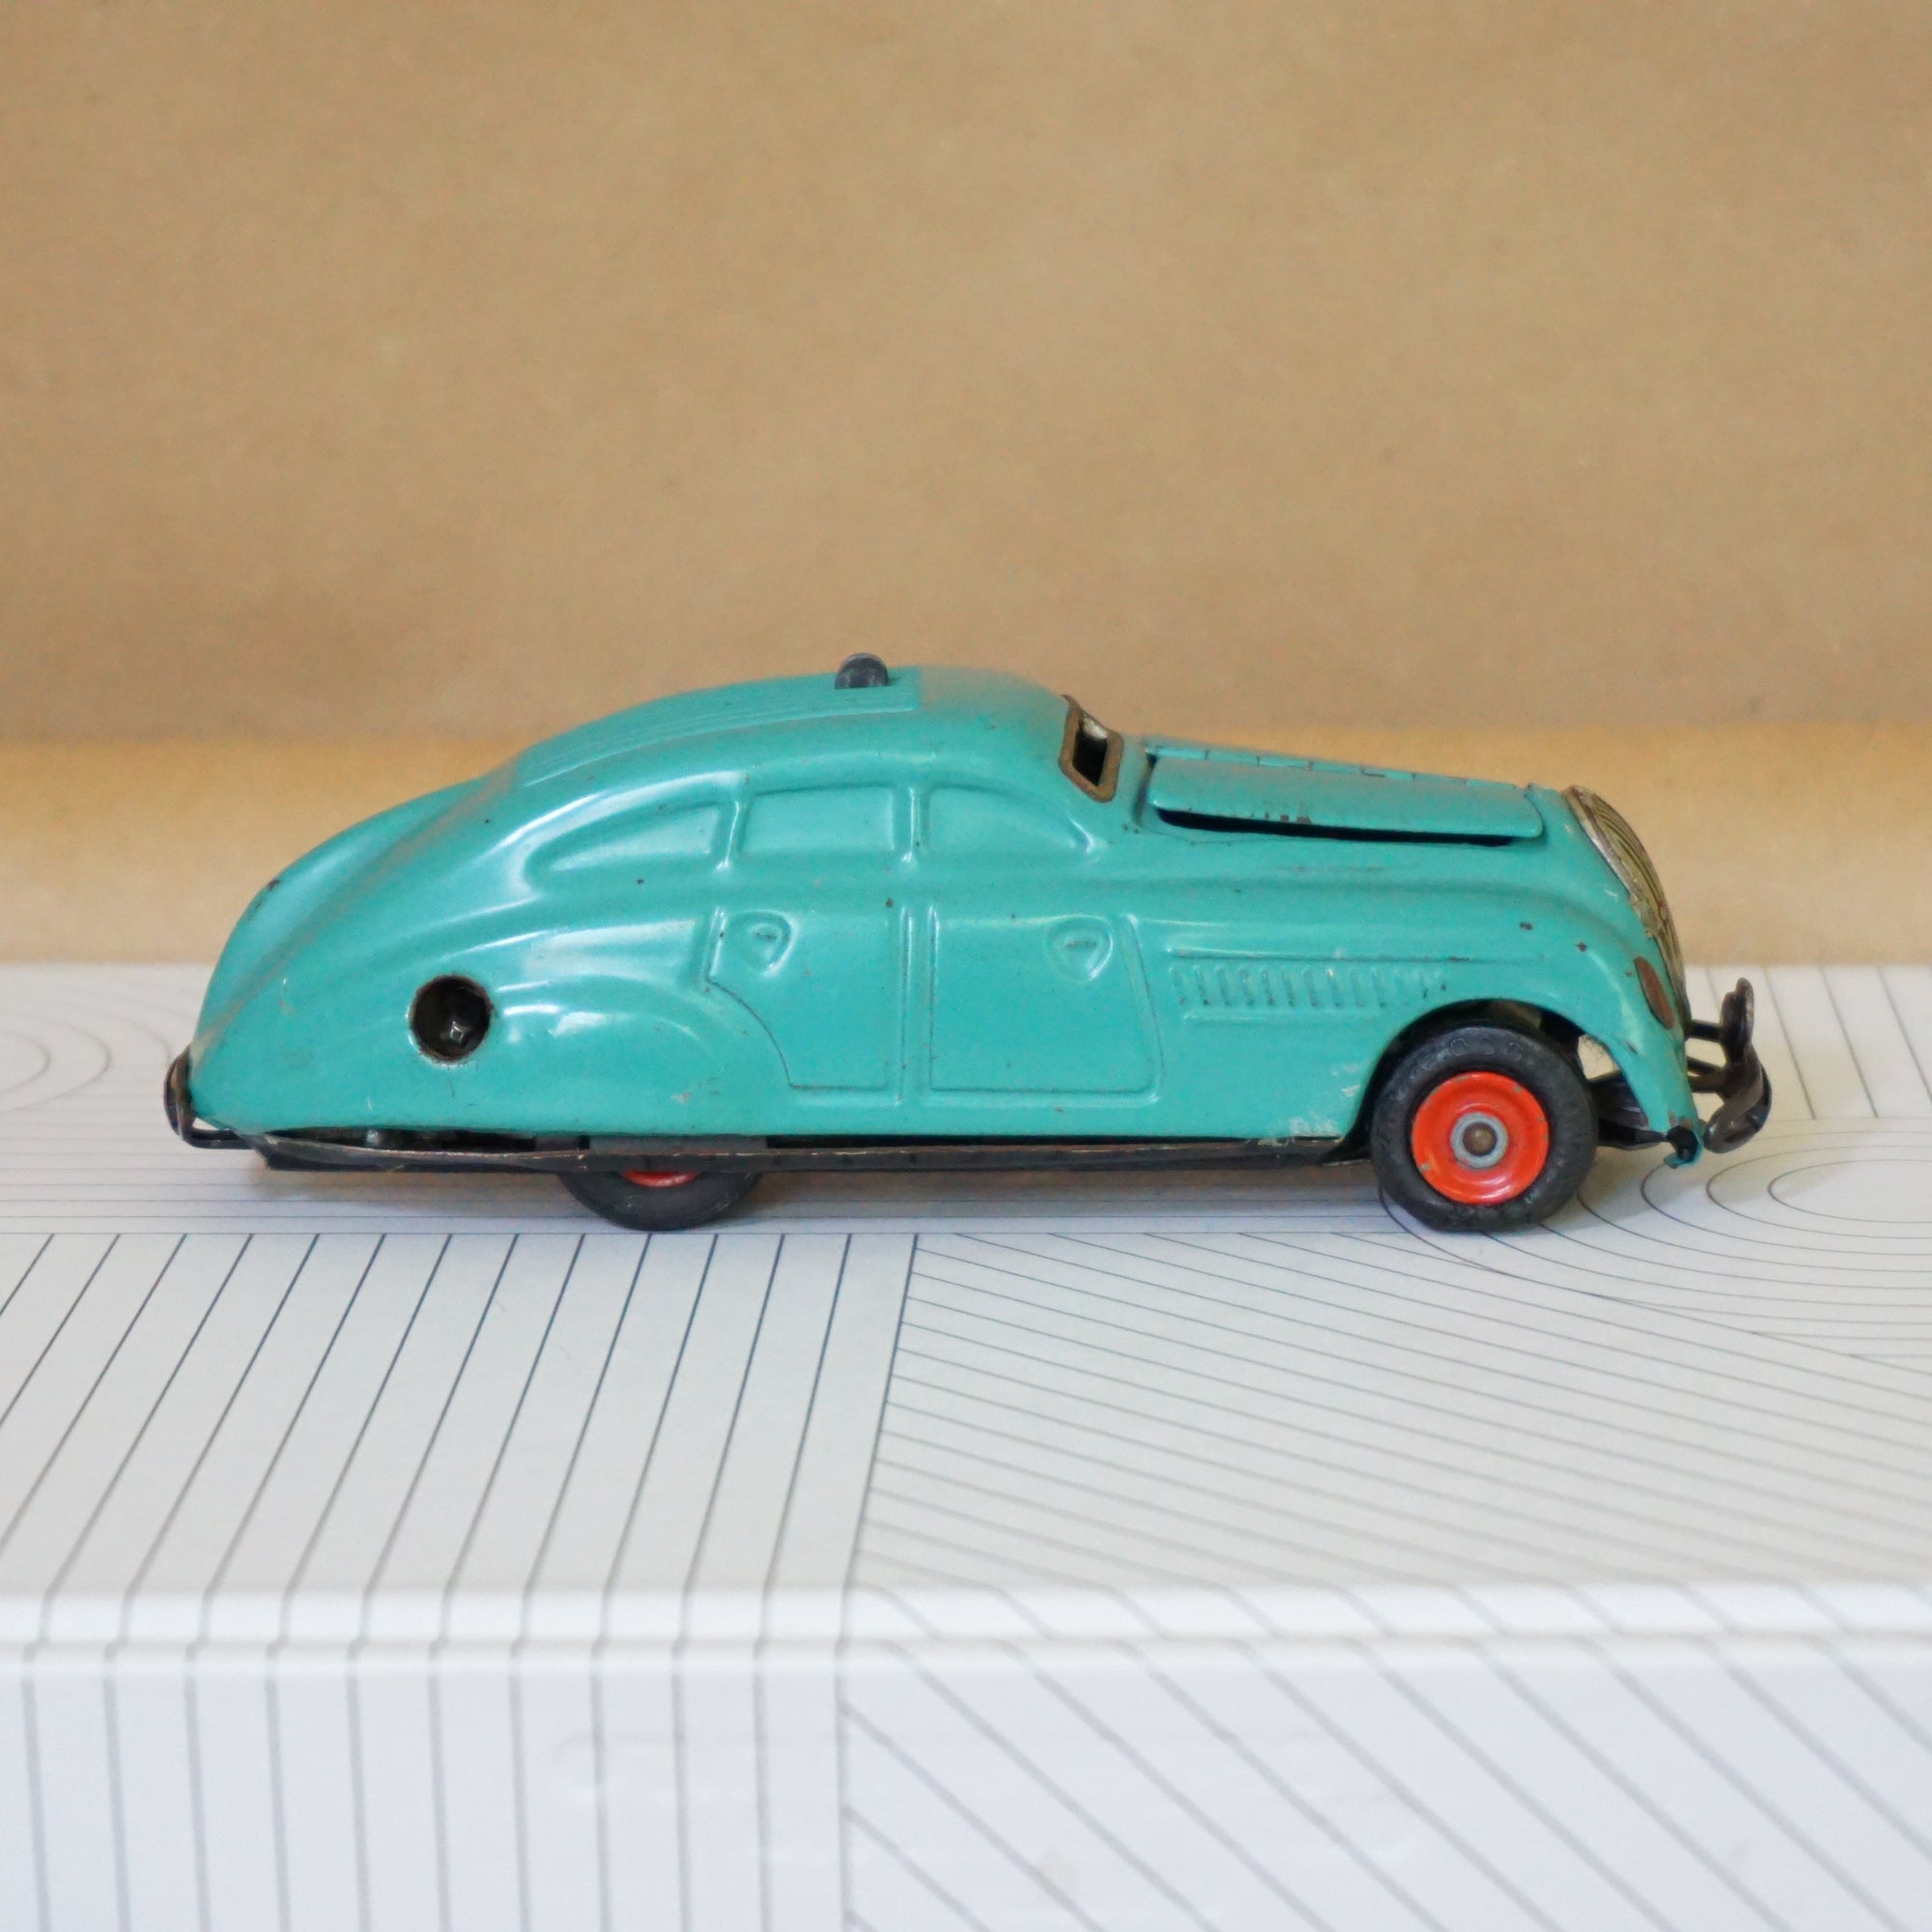 1930s–1940s SCHUCO "Kommando Anno 2000" Teal Wind-Up Car with Key. Made in Germany.